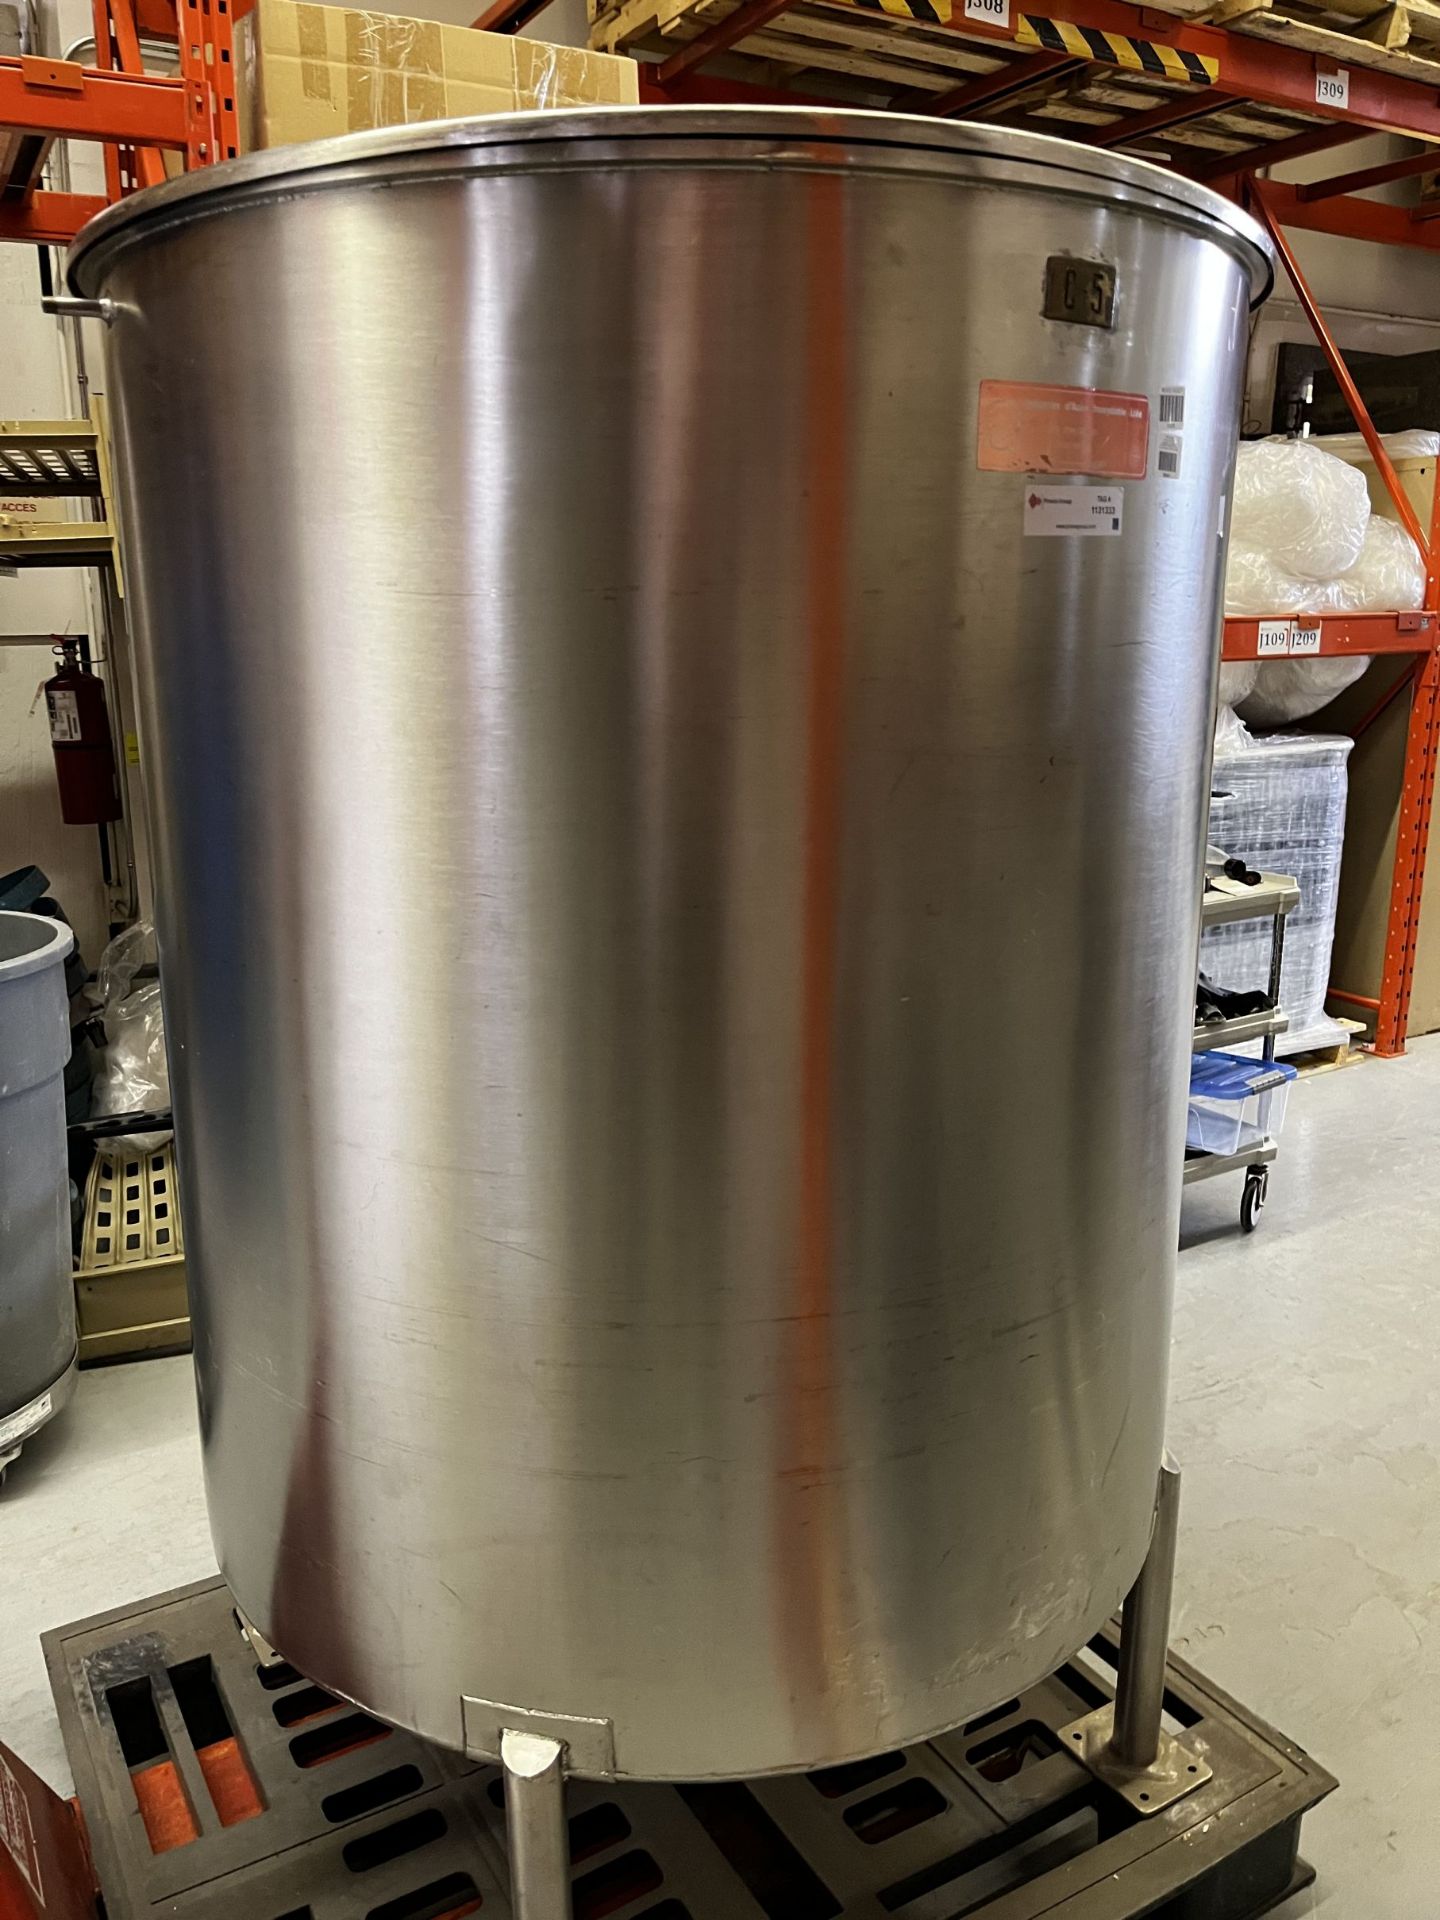 Stainless Steel Tank - Approx 500 Liters